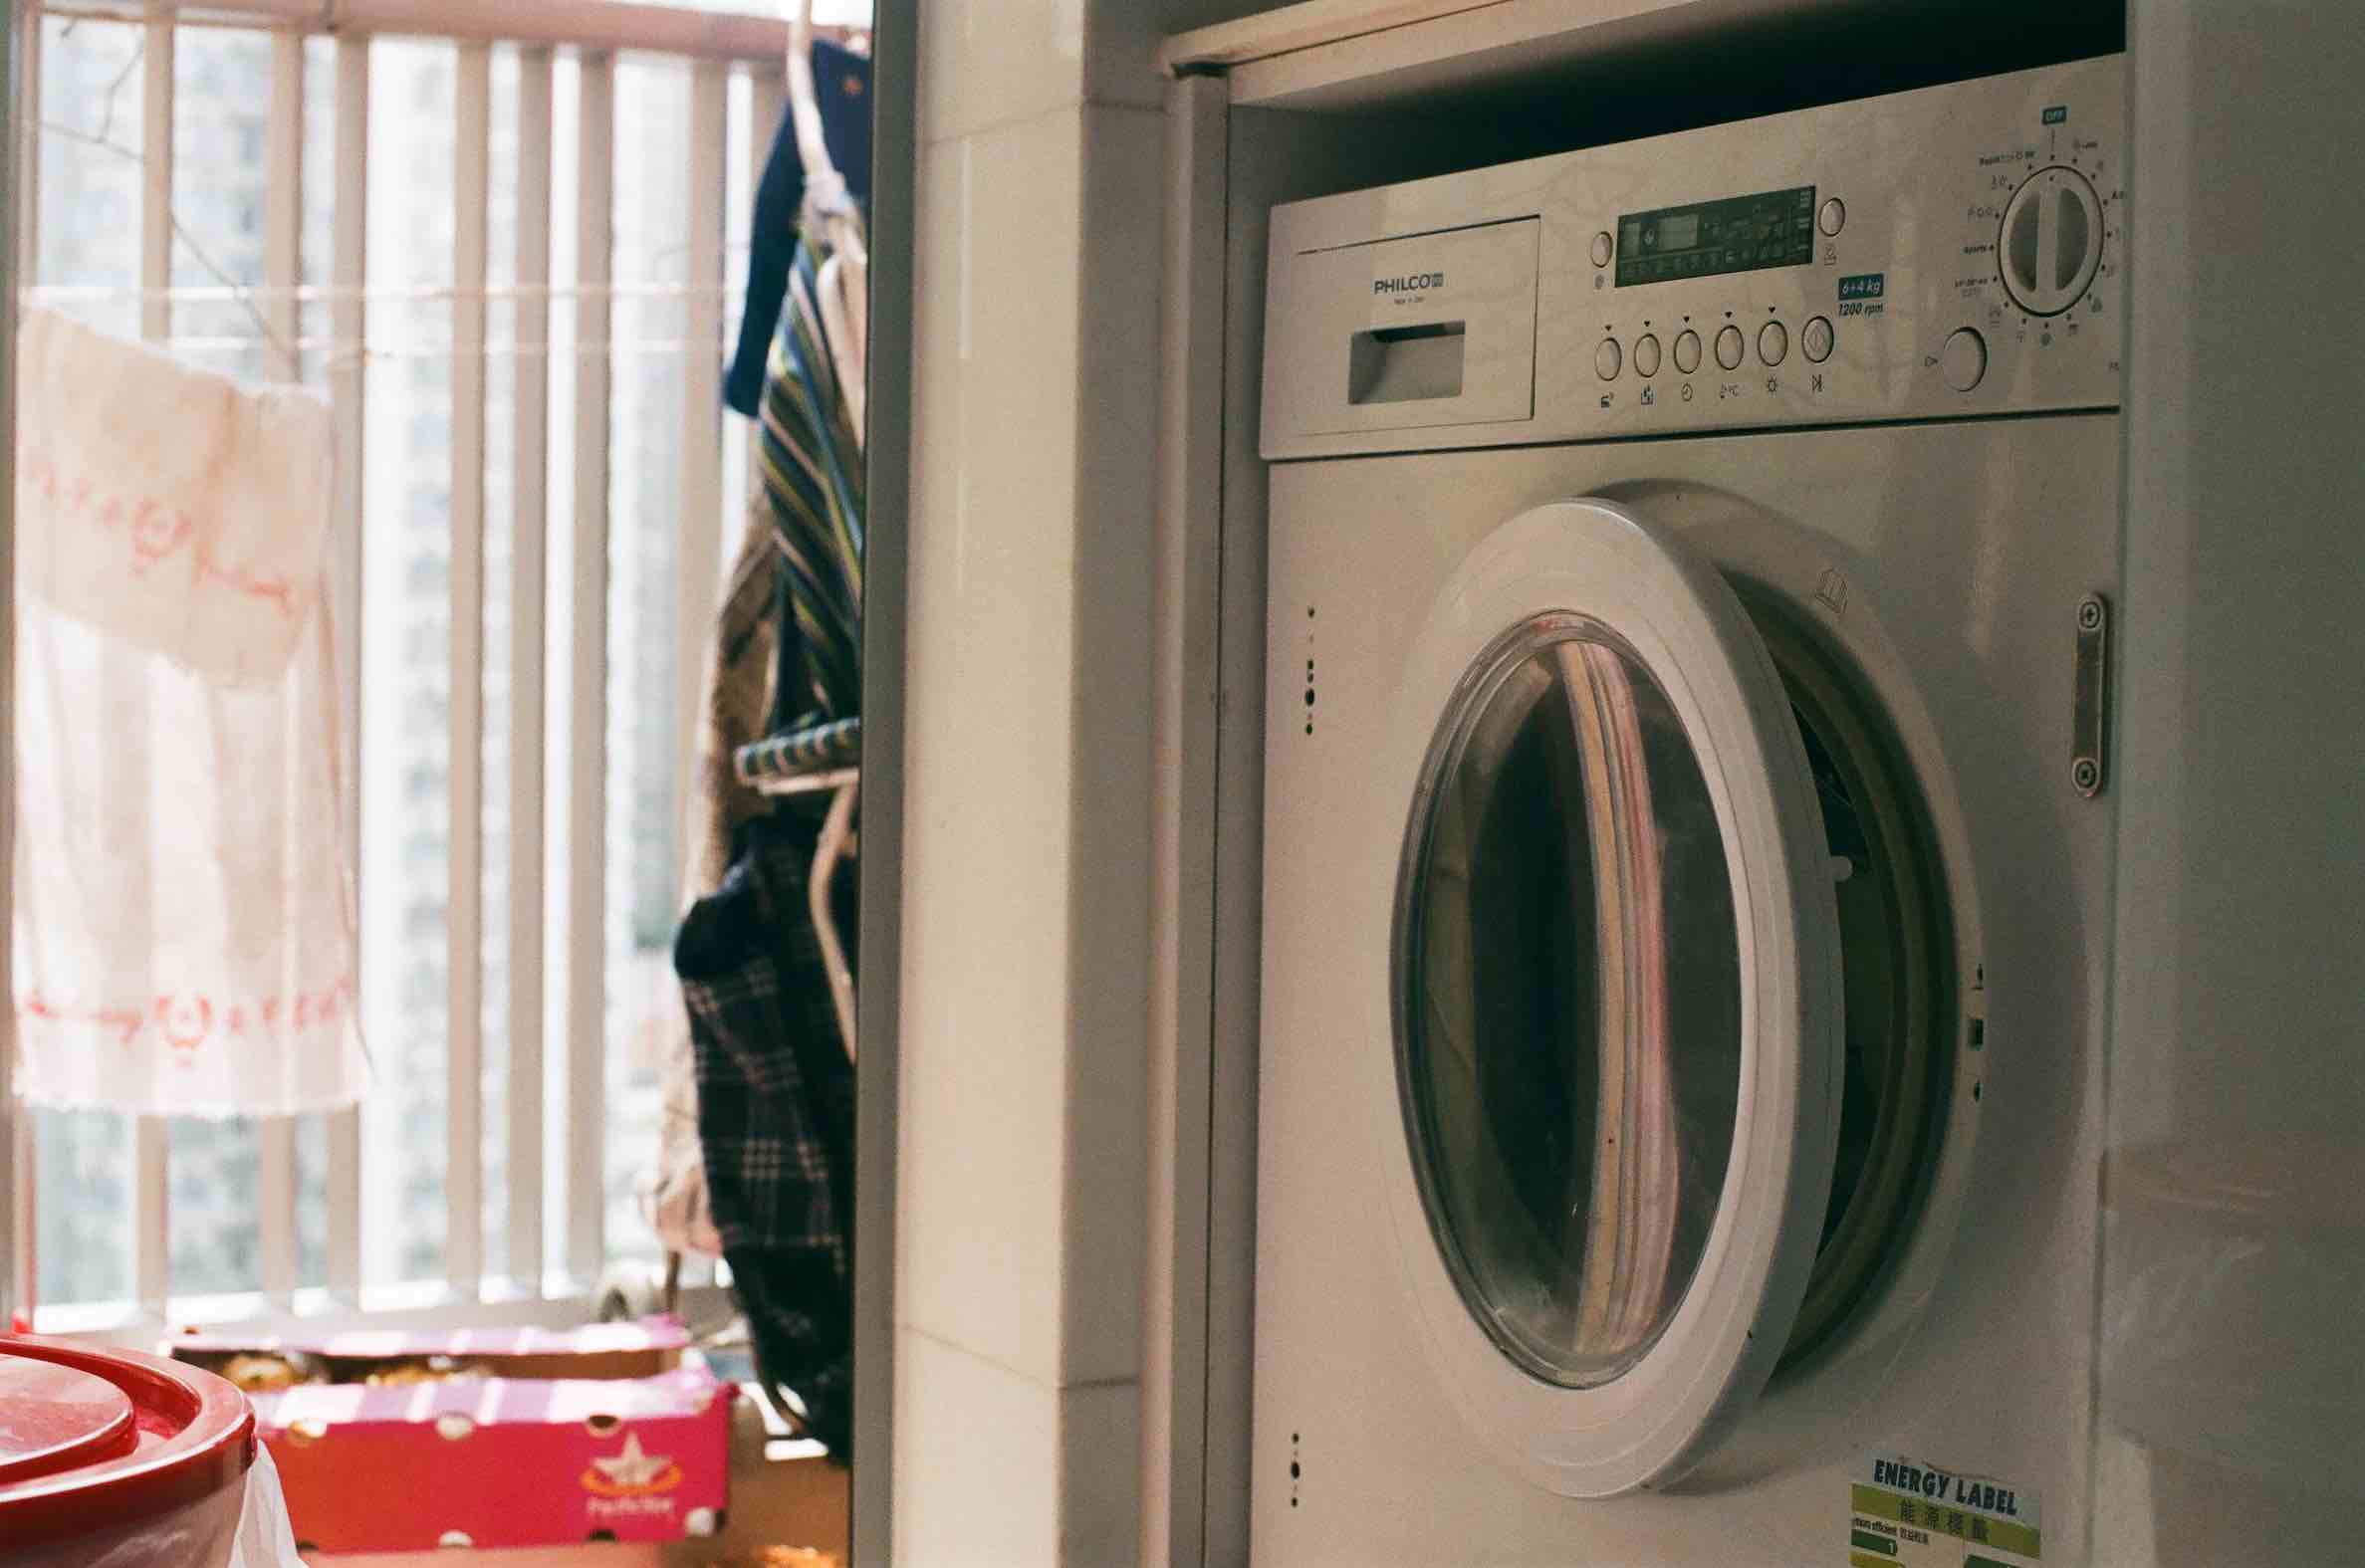 Clothes dryer vs clothes rack dryer — which is better?